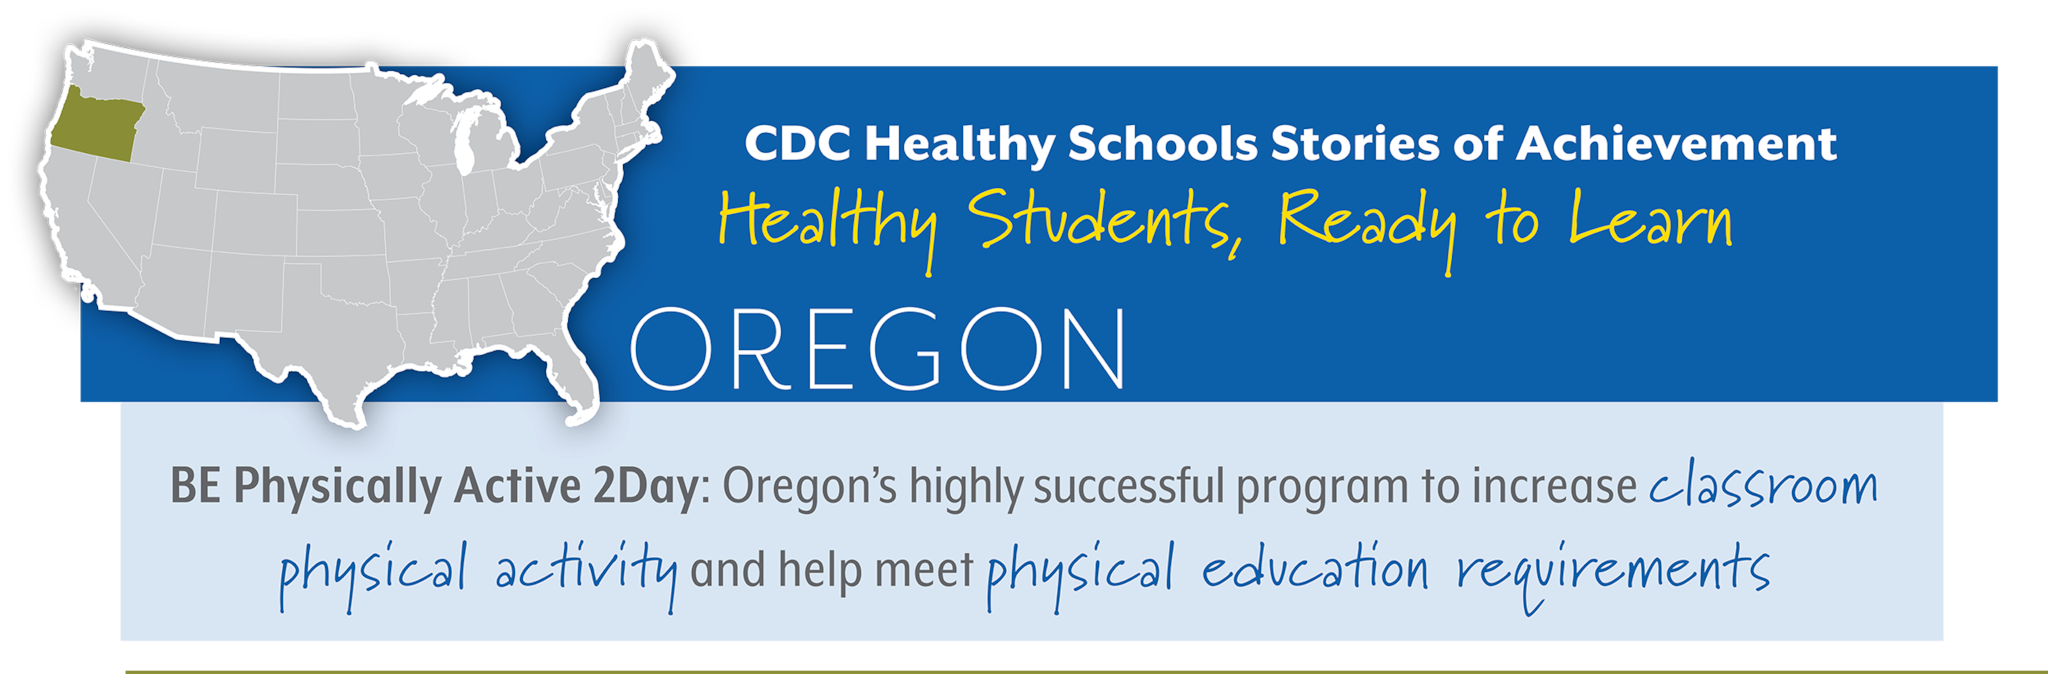 CDC Healthy Schools Stories of Achievement  Healthy Students, Ready to Learn  OREGON BE Physically Active 2Day: Oregon’s highly successful program to increase classroom  physical actvit and help meet physical educaton requirements